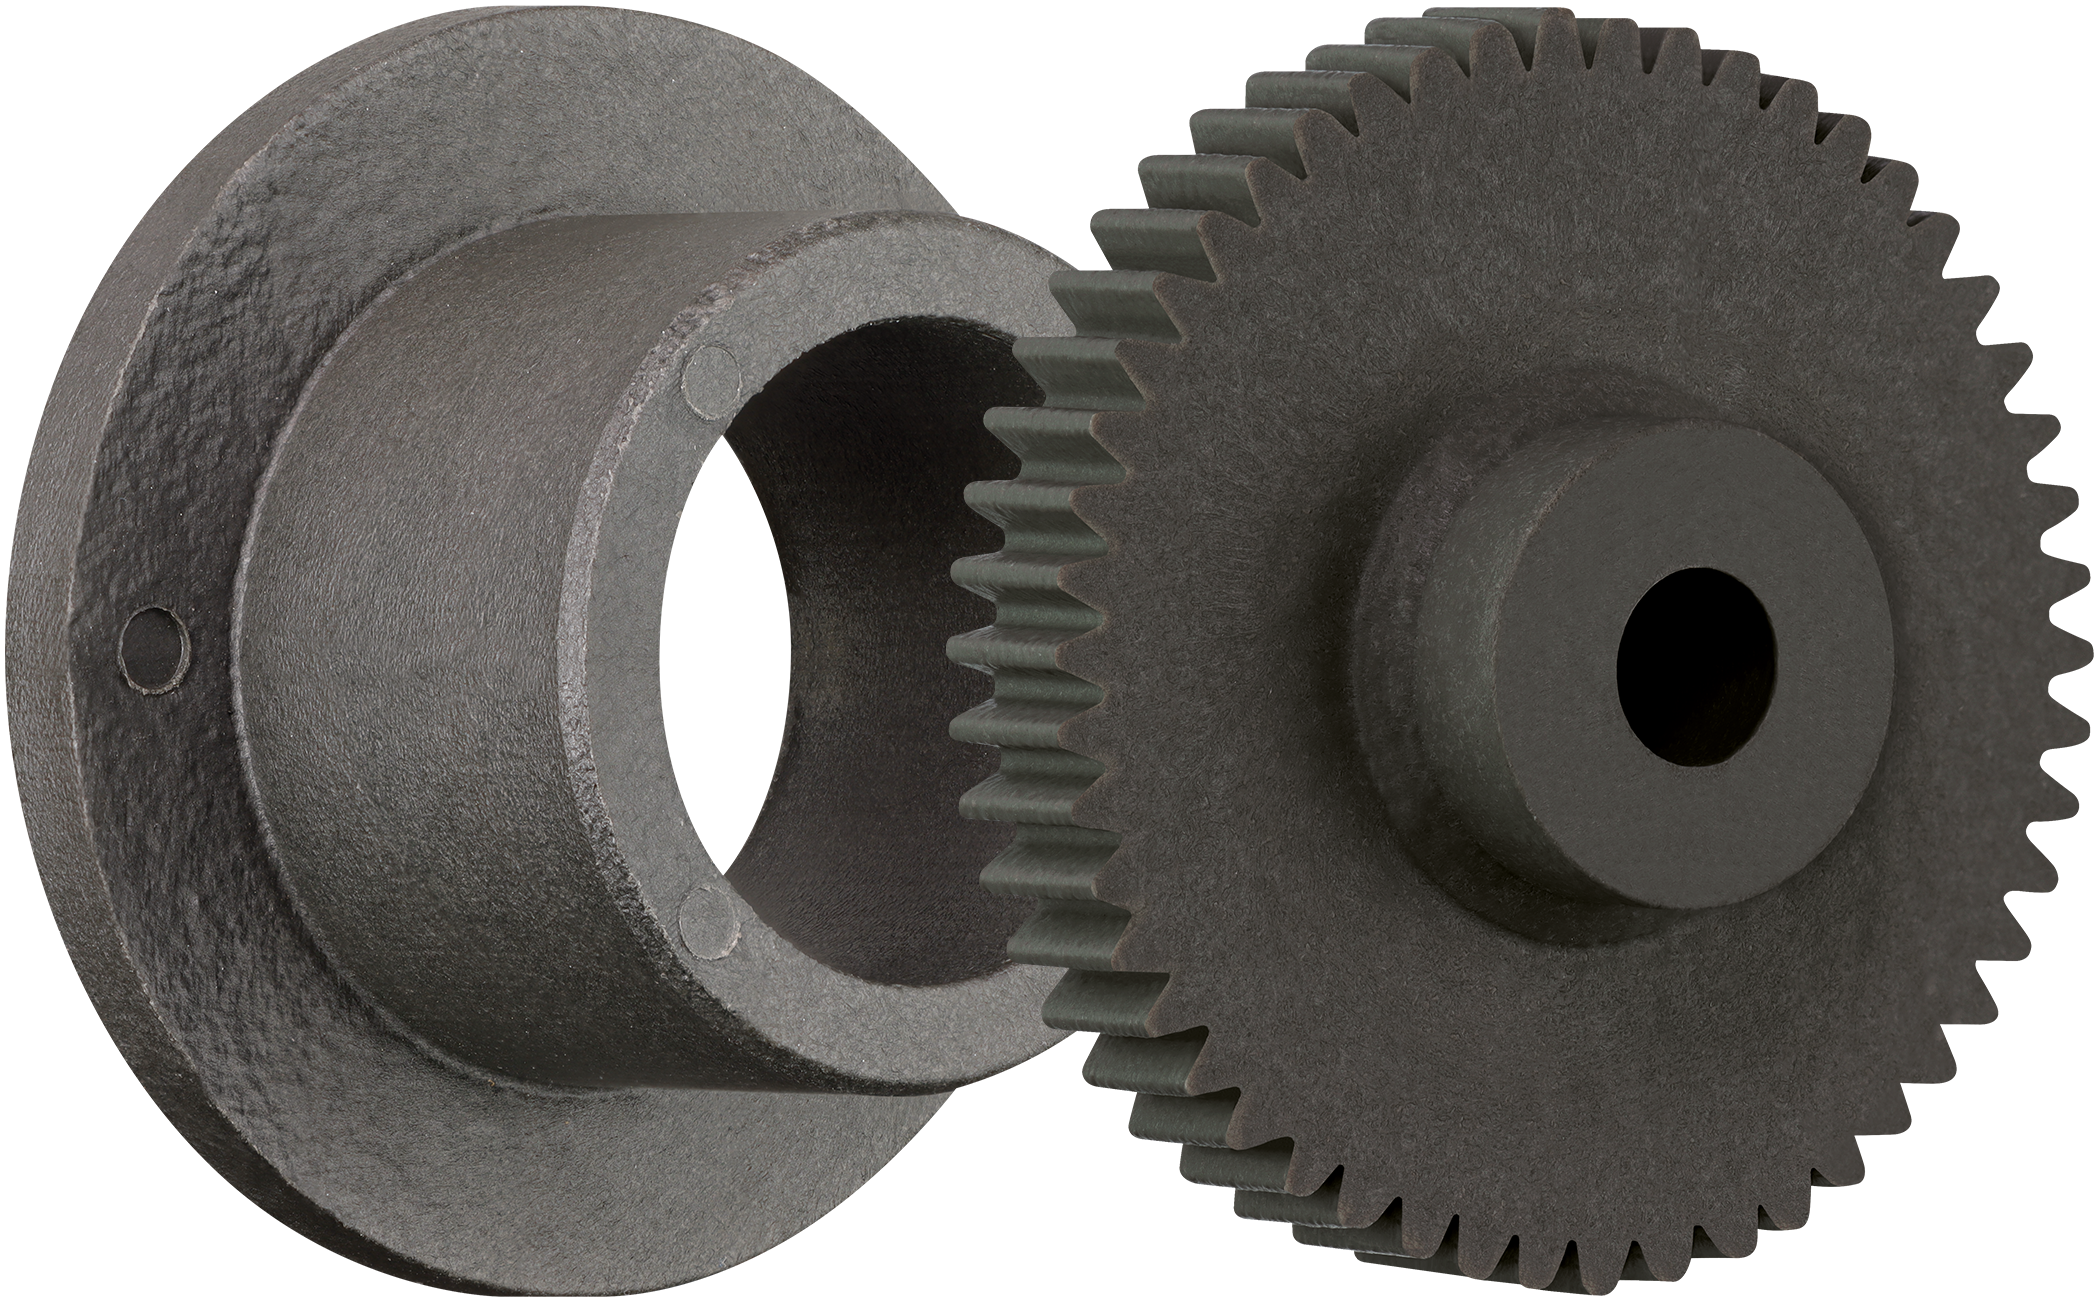 Injection moulded plain bearing with flange and injection moulded gear from 3D printed tool moulds